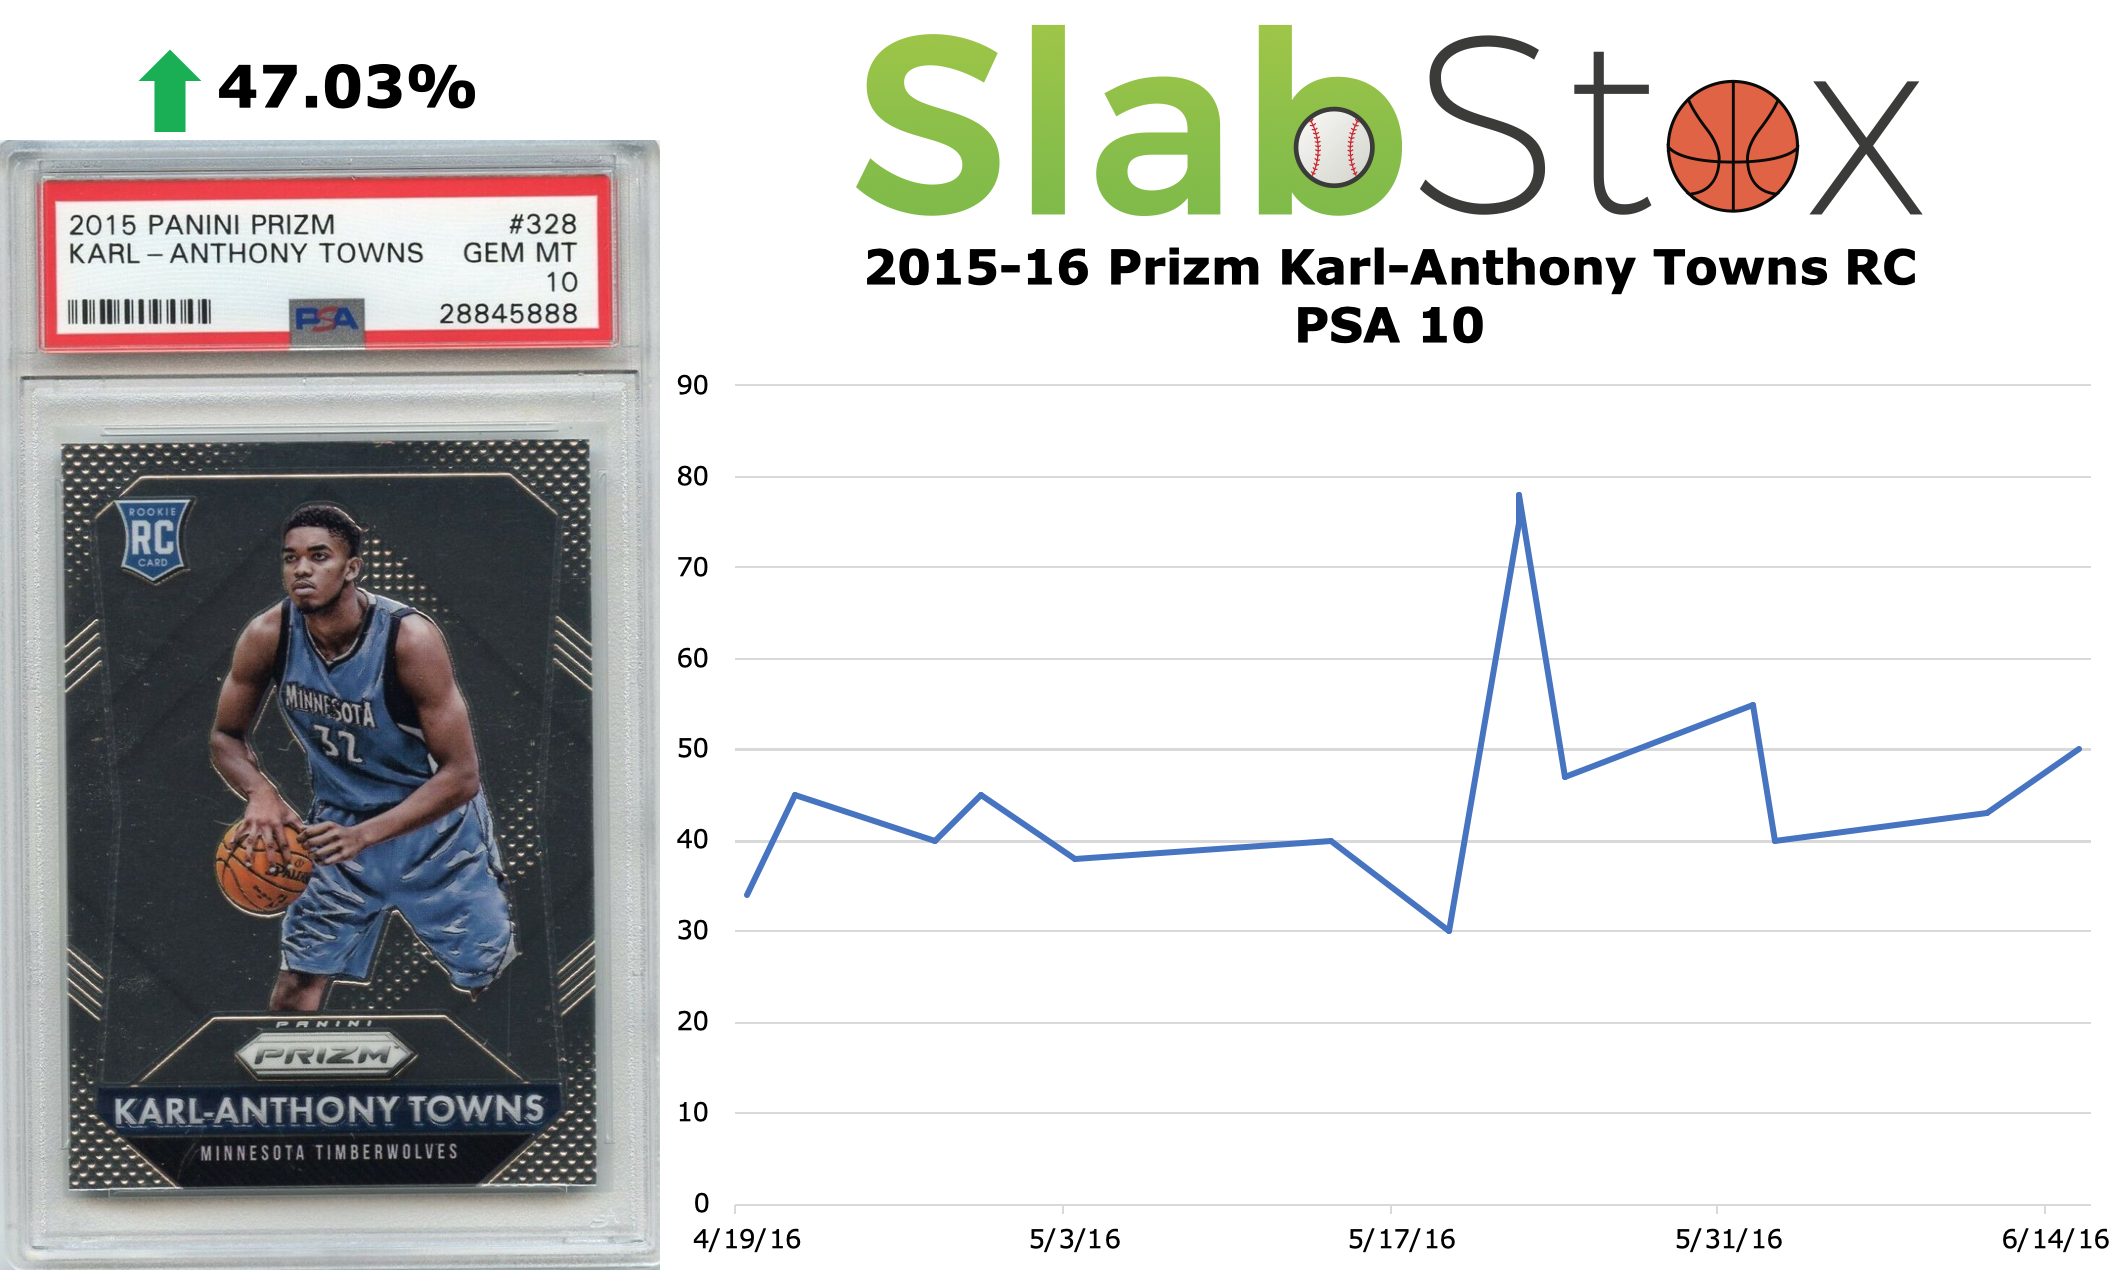 SlabStox infographic for 2015-16 Prizm Karl-Anthony Towns RC PSA 10 sports trading card